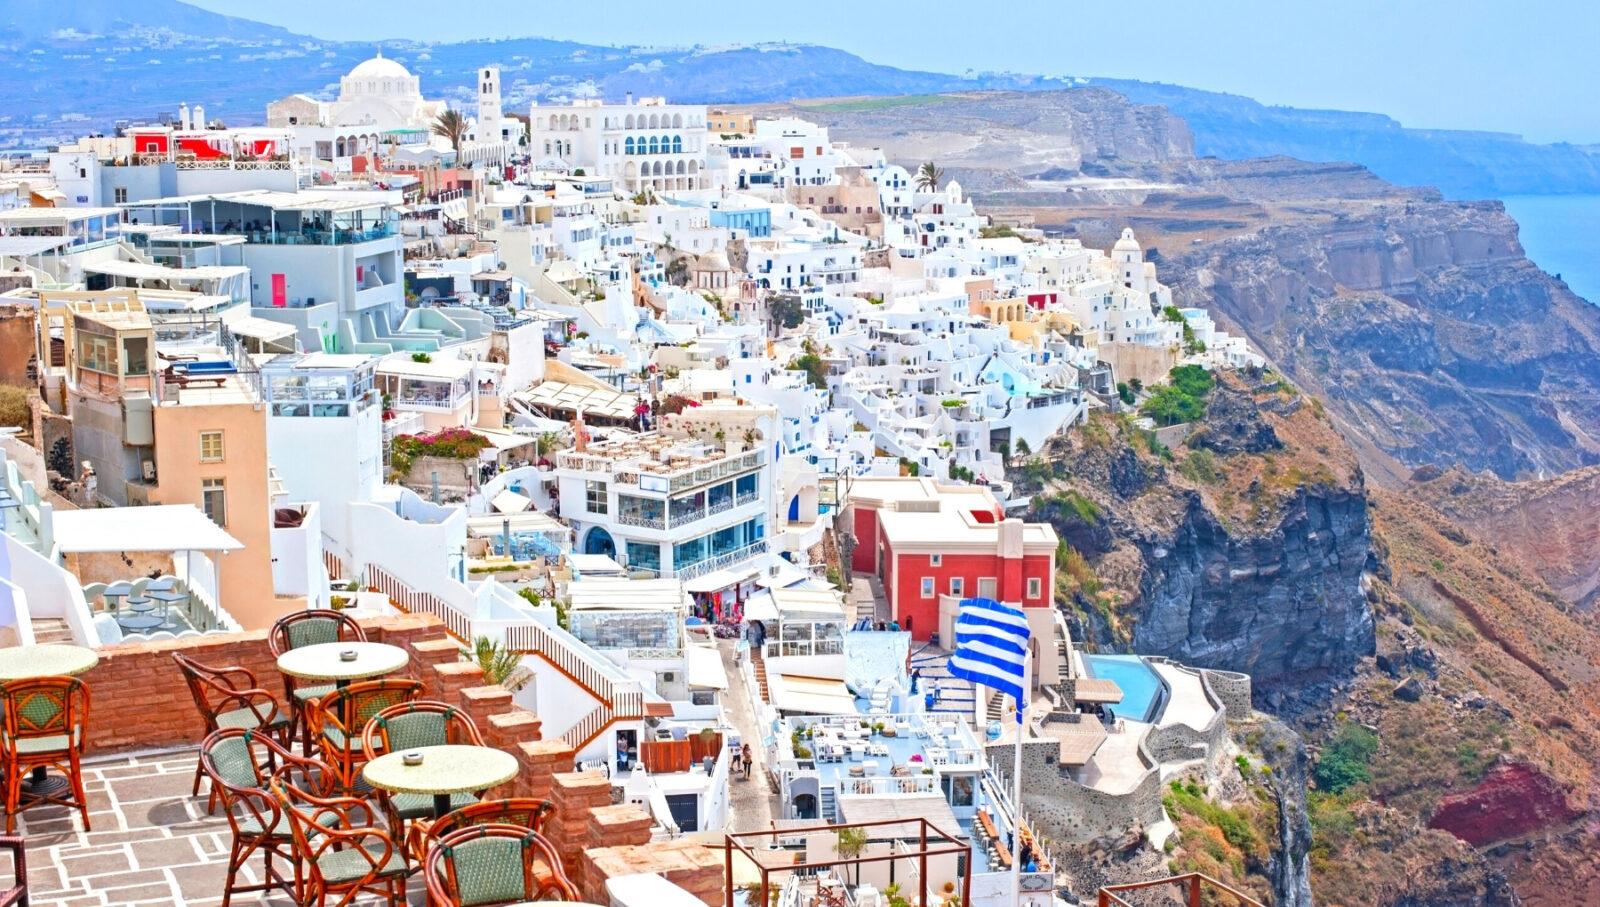 8.188 m² PLOT WITH A 4,400 m² BUILDING PERMIT AND HOTEL FOR SALE IN SANTORINI, GREECE